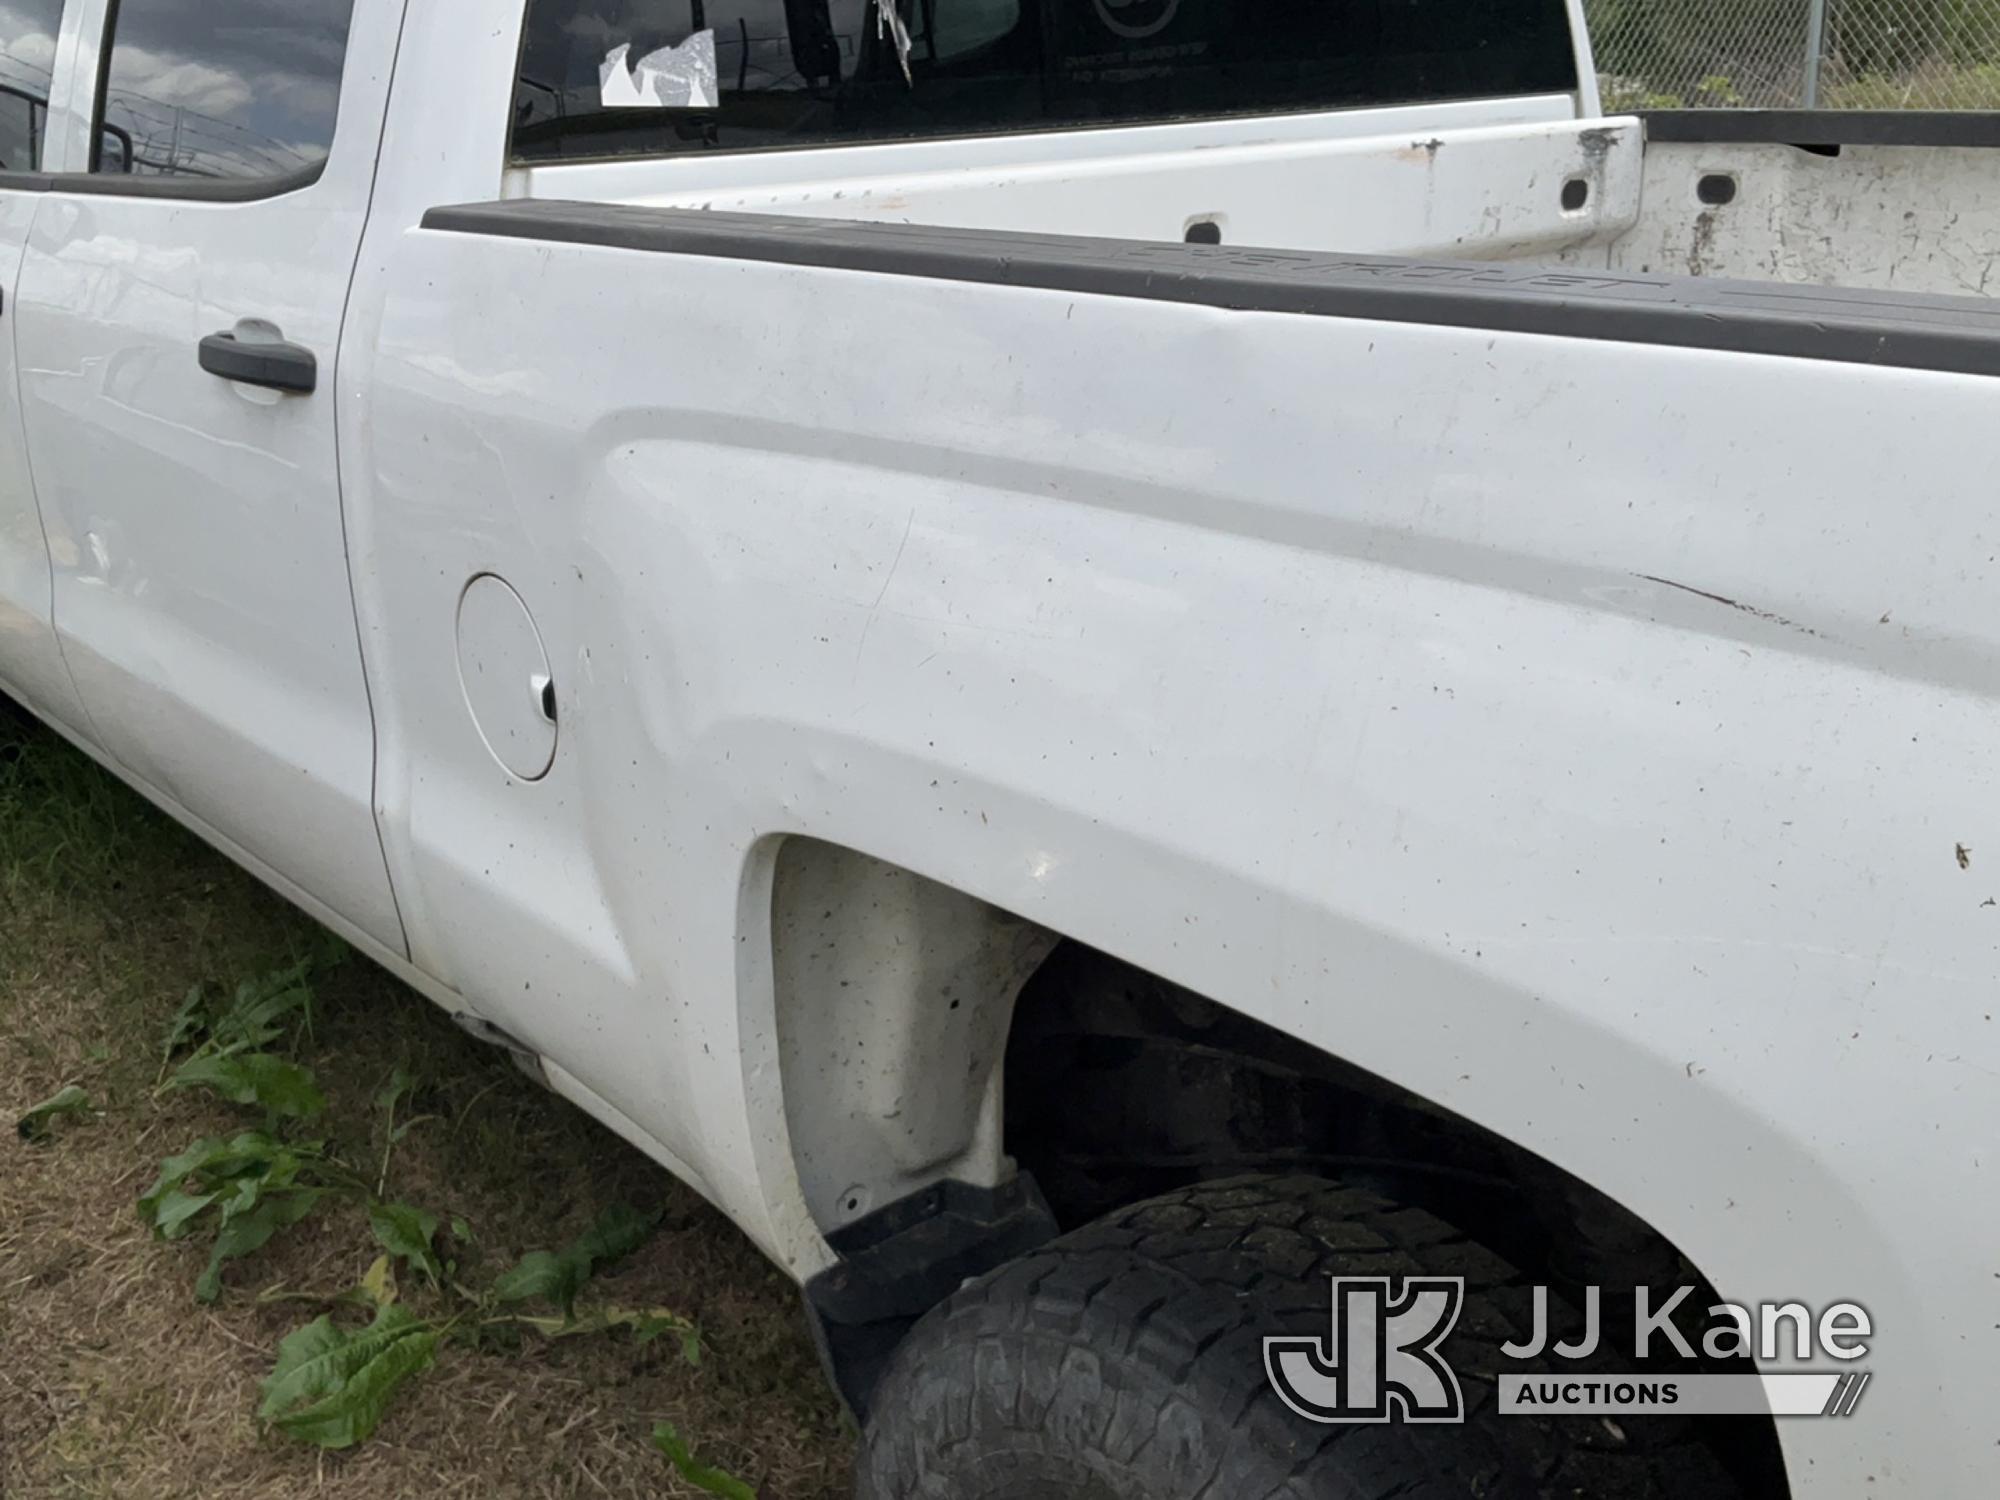 (Florence, SC) 2018 Chevrolet Silverado 2500 4x4 Crew-Cab Pickup Truck, Rear End needs replaced. Run